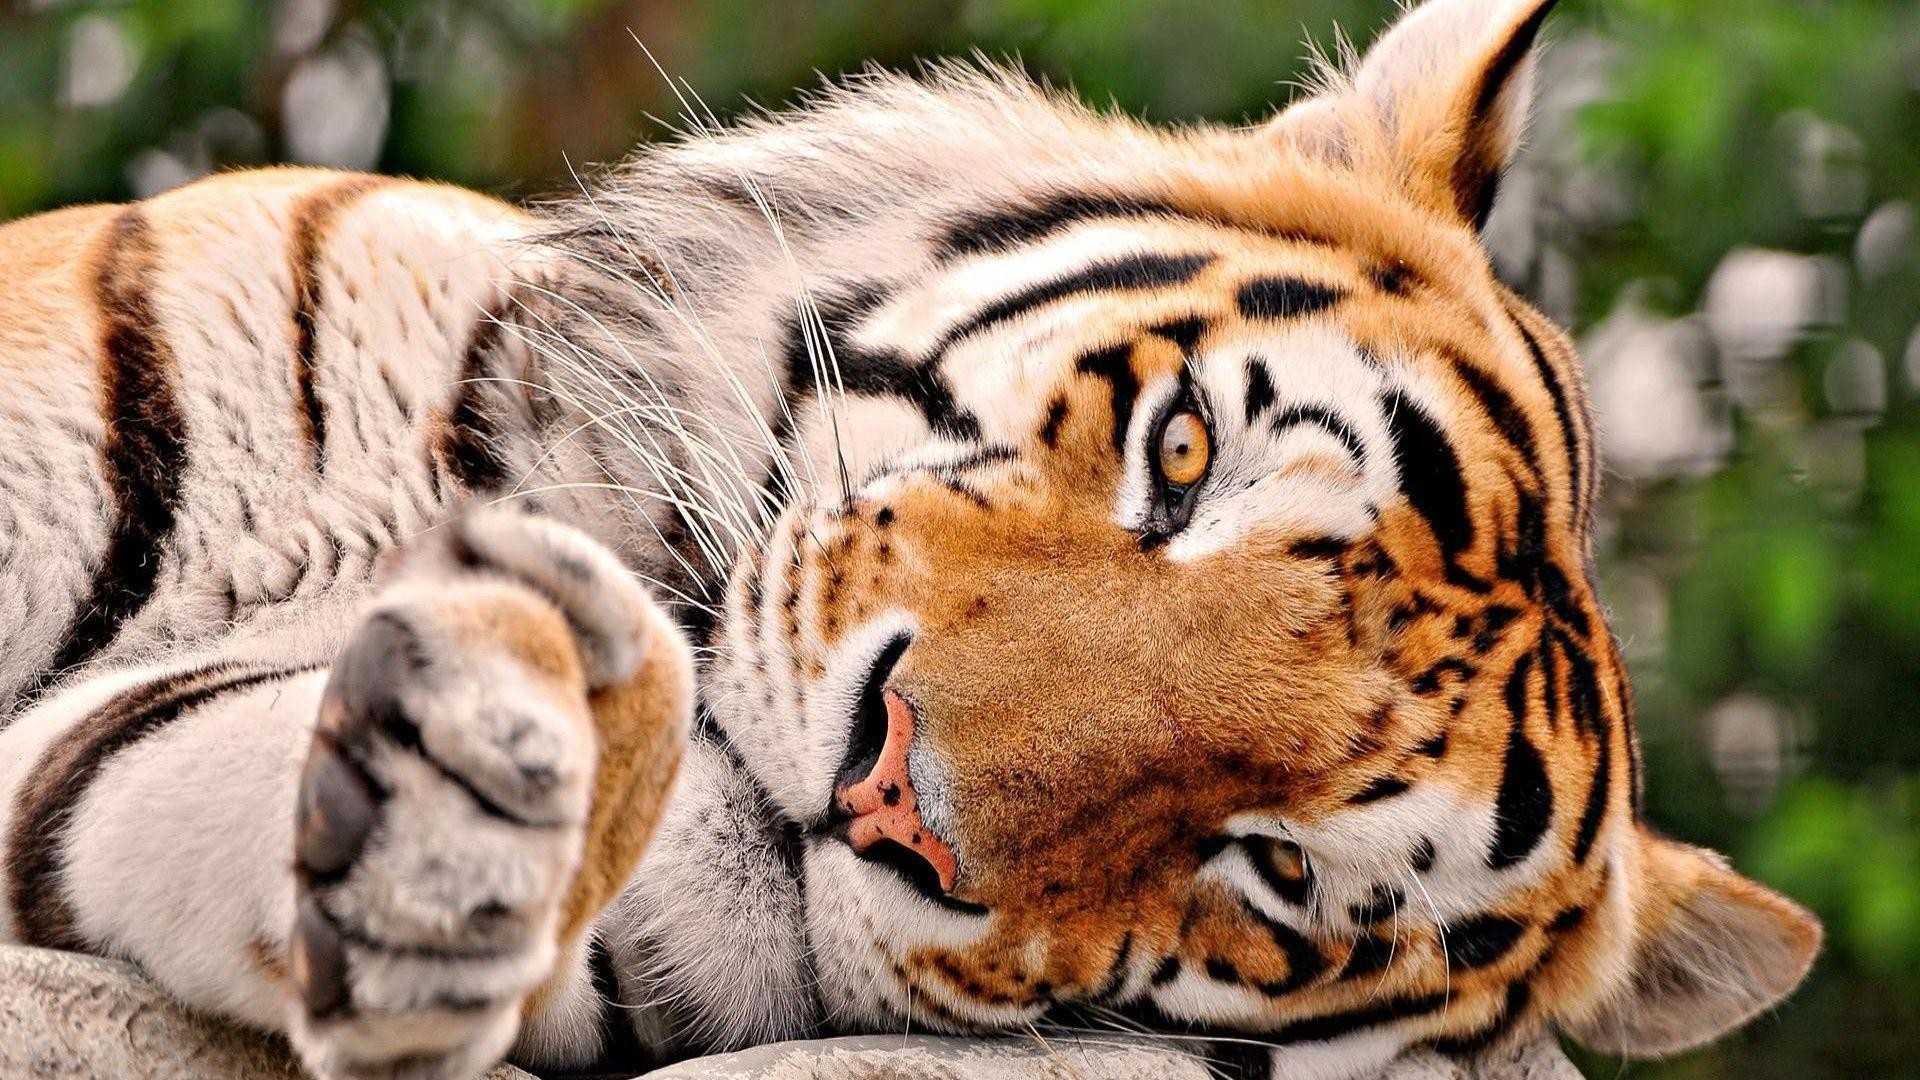 2560x1600 / tiger hd wallpaper - tiger category - Coolwallpapers.me!